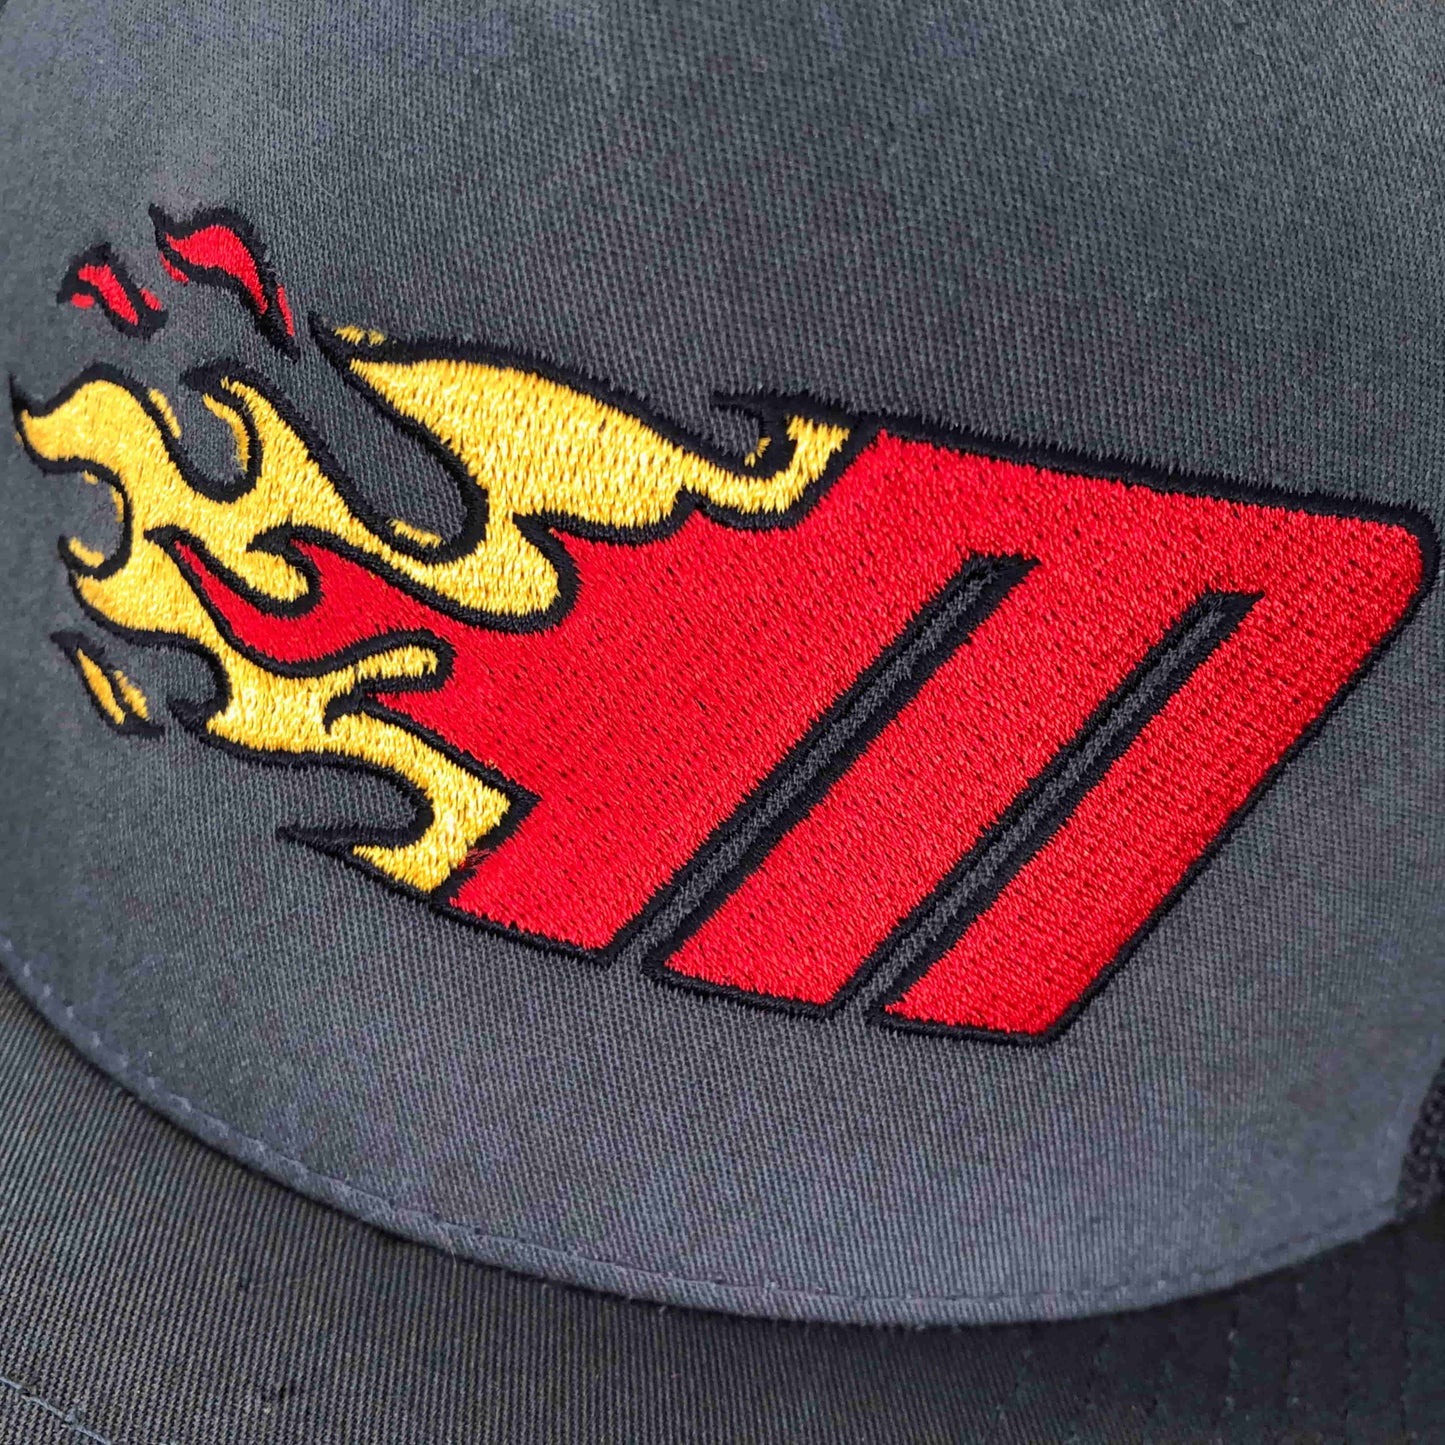 Close up photo of Miller Machine 5 panel trucker cap with a Flaming M in red and yellow. Cap is a grey color.